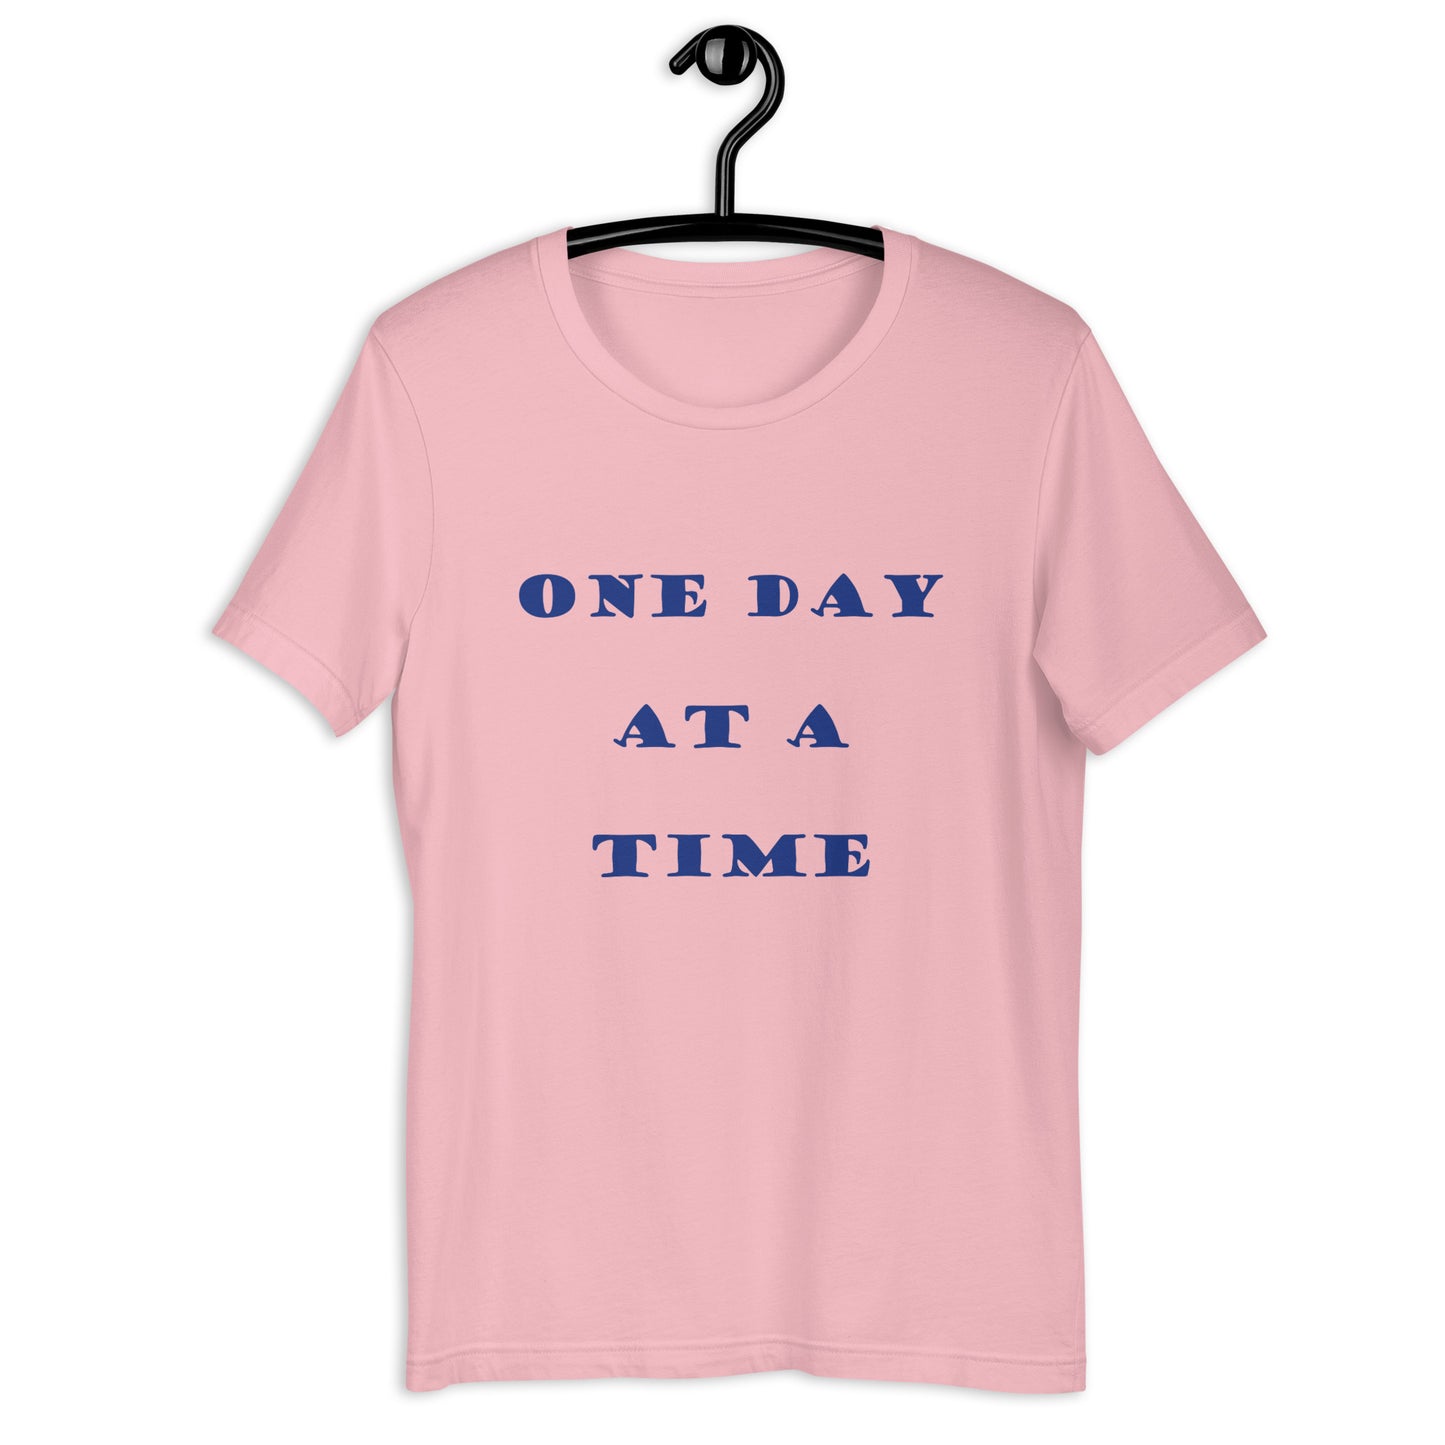 One Day at a Time unisex t-shirt